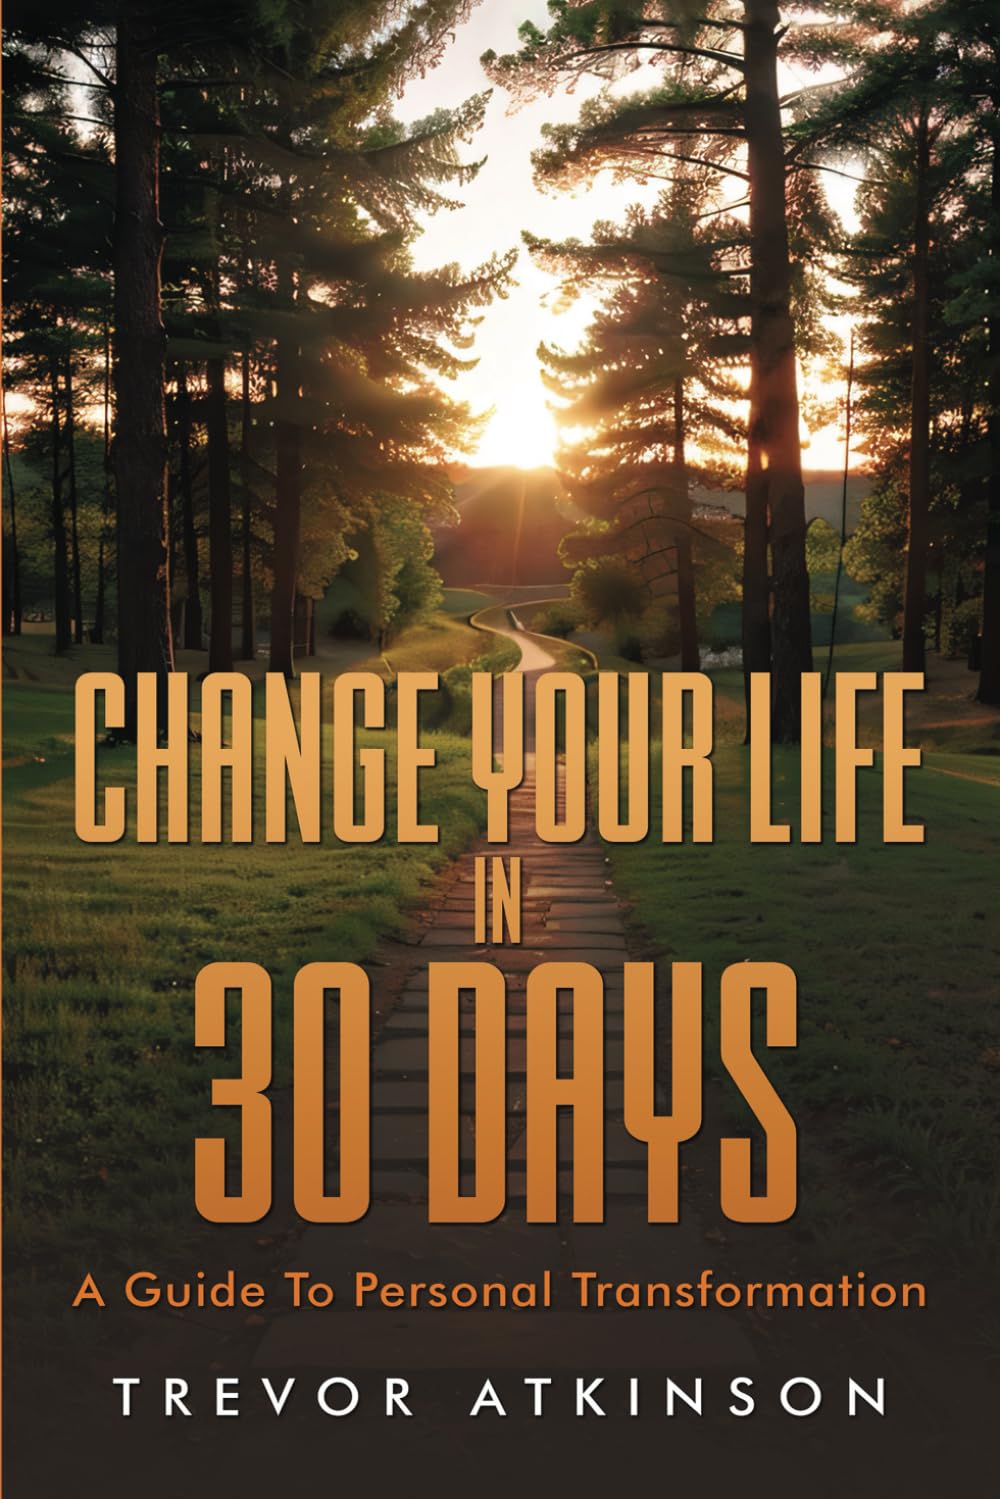 Transform Your Life in Just 30 Days: Trevor Atkinson's New Book Offers a Blueprint for Personal Growth and Healing